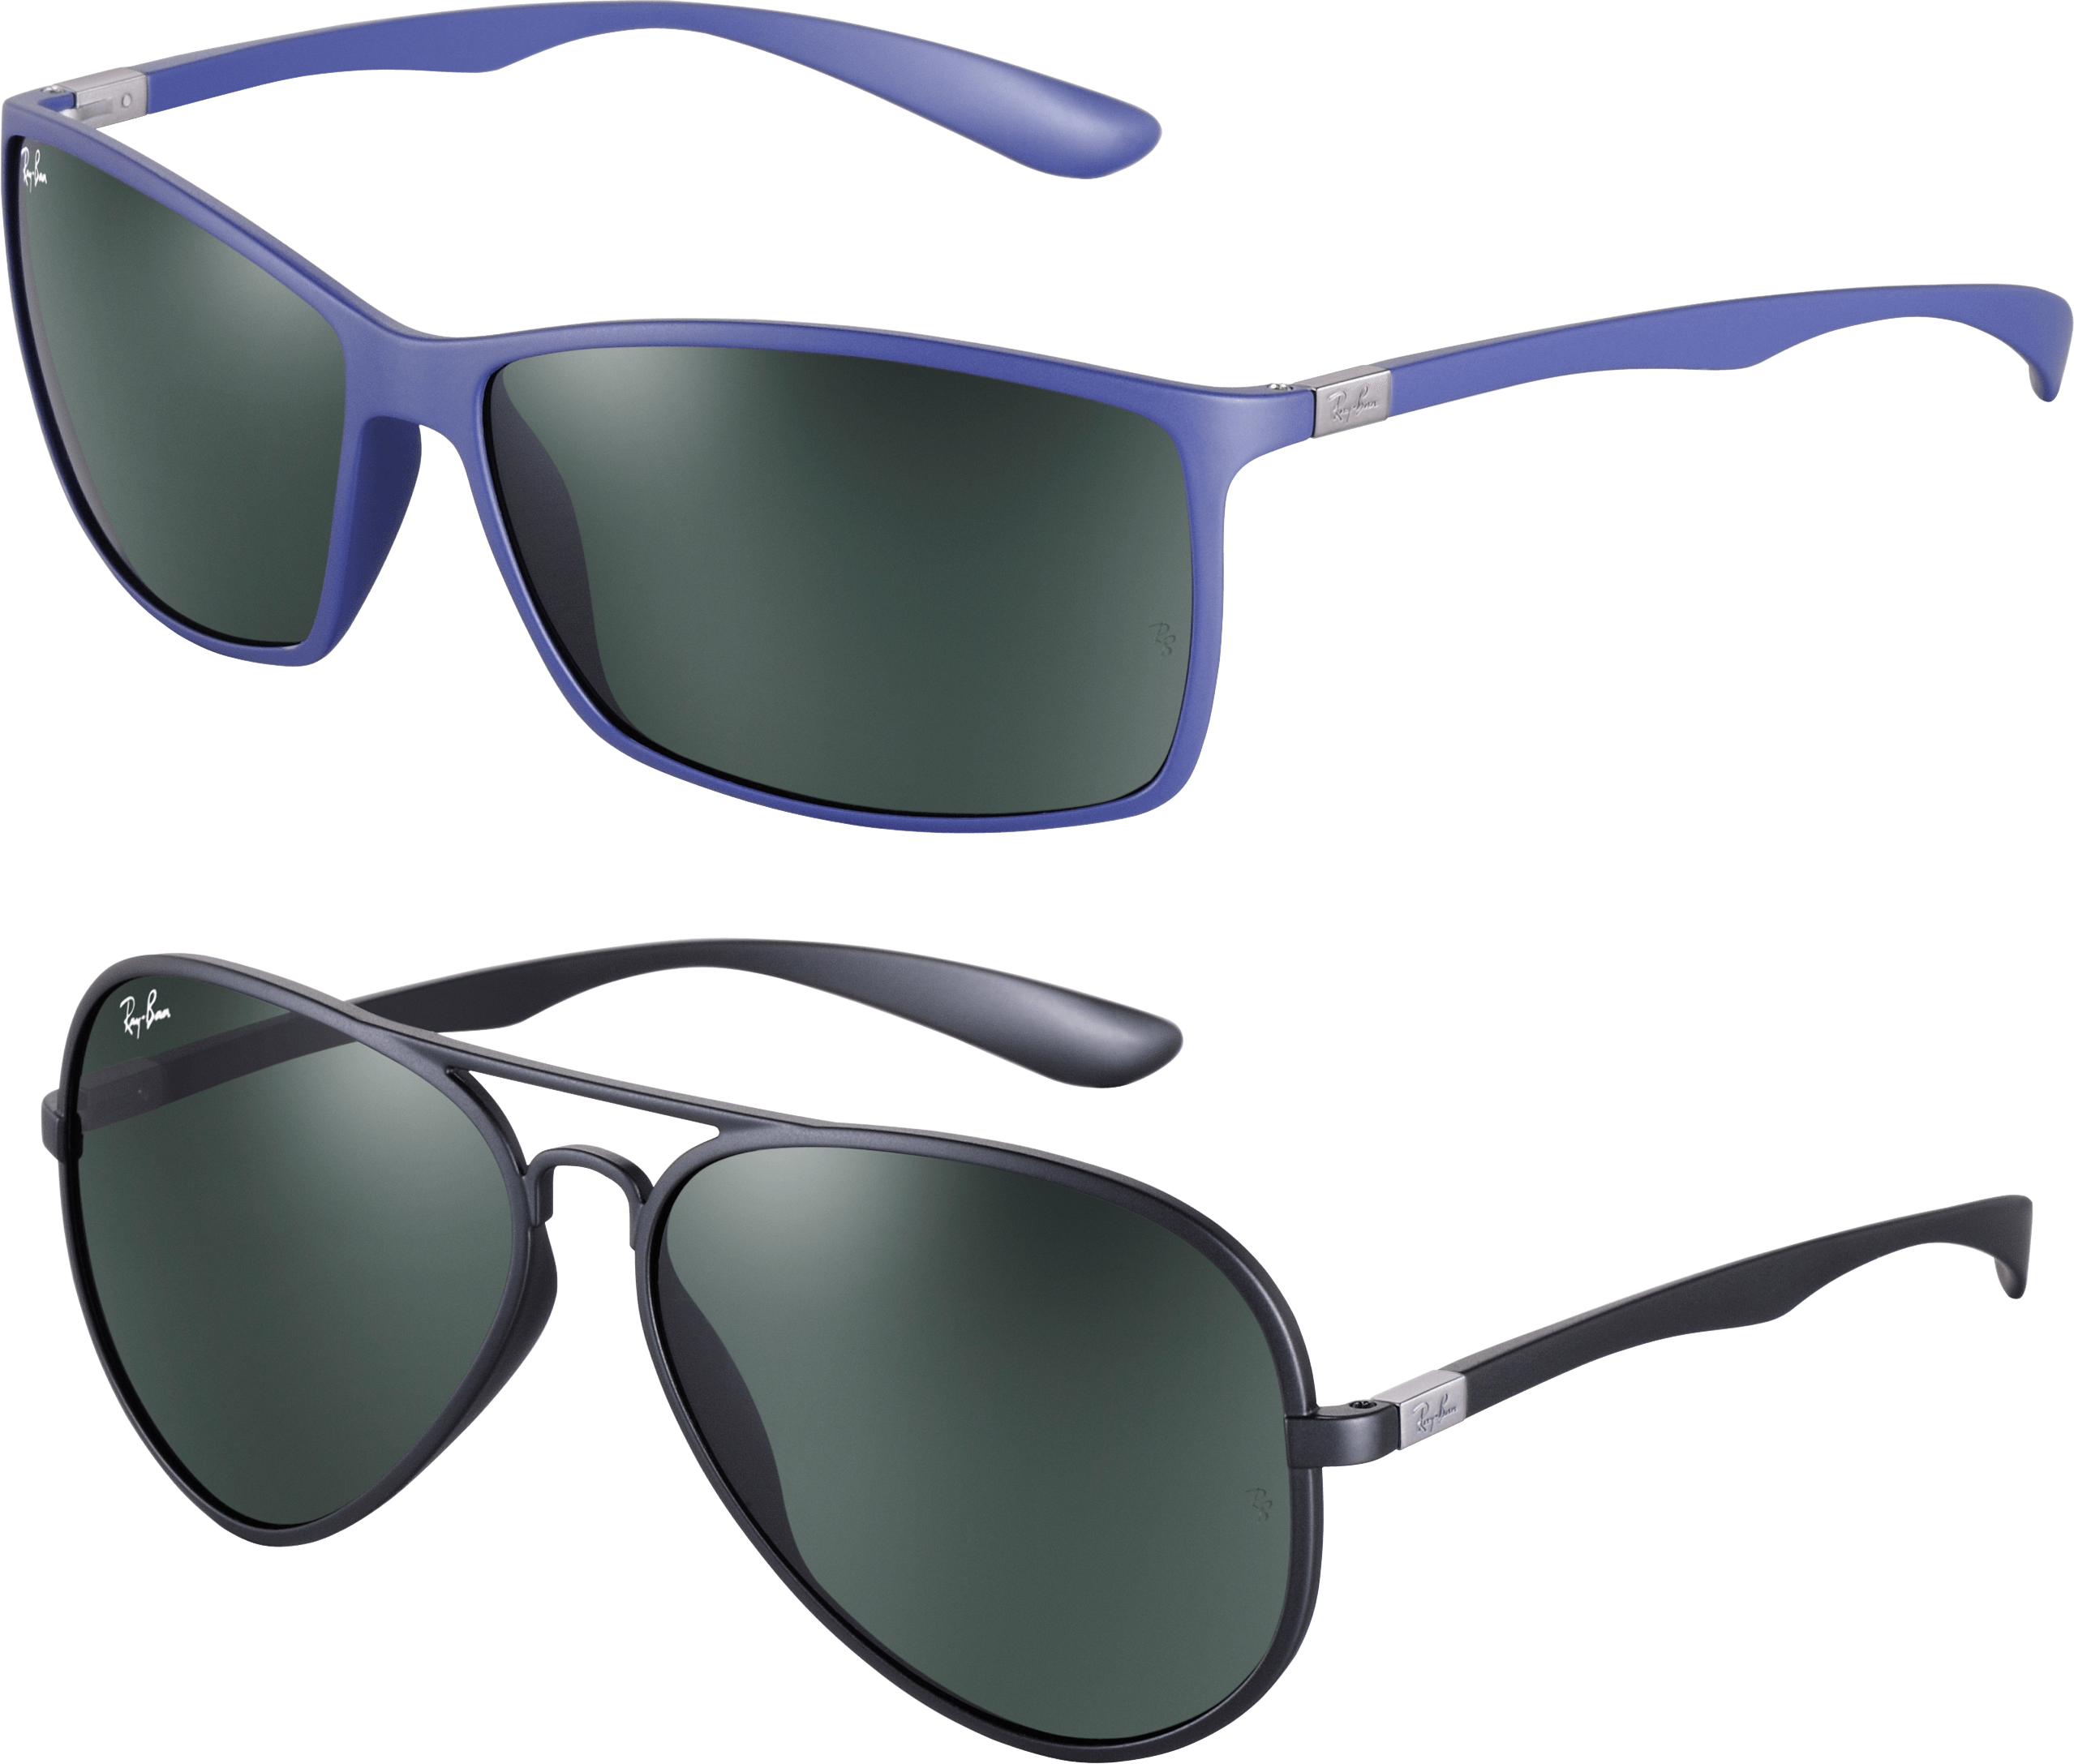 Sunglasses Glasses Free Download PNG HD Clipart